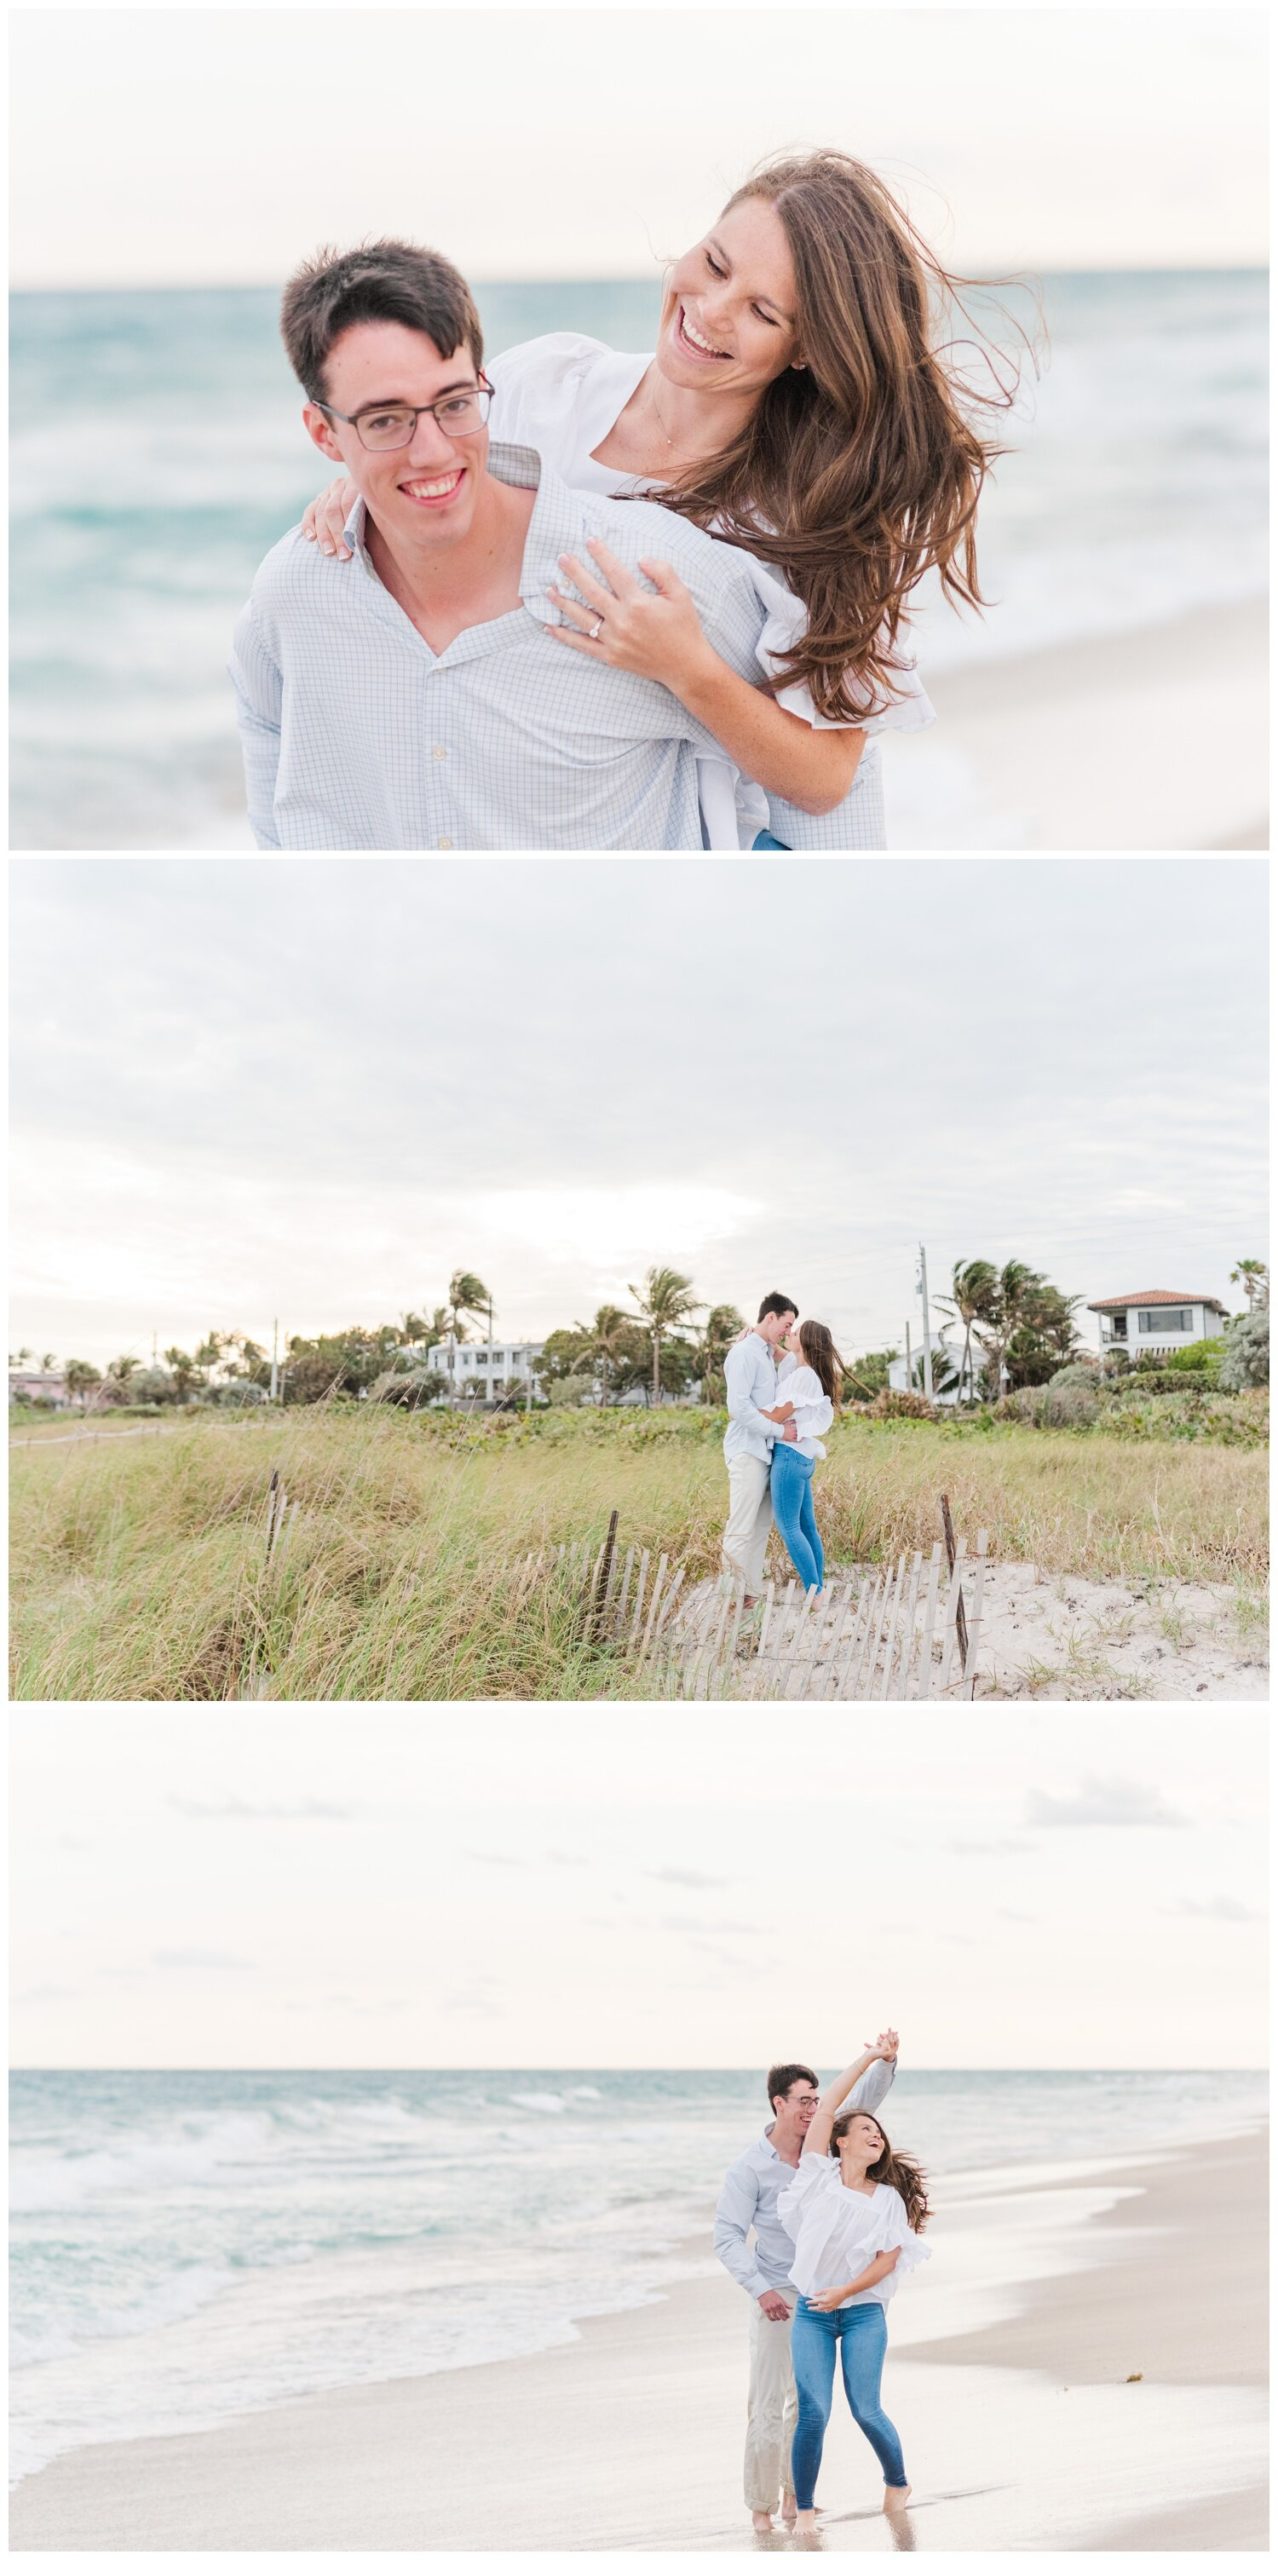 CMageePhotography_DelrayBeach_Engagement_2021_0008.jpg